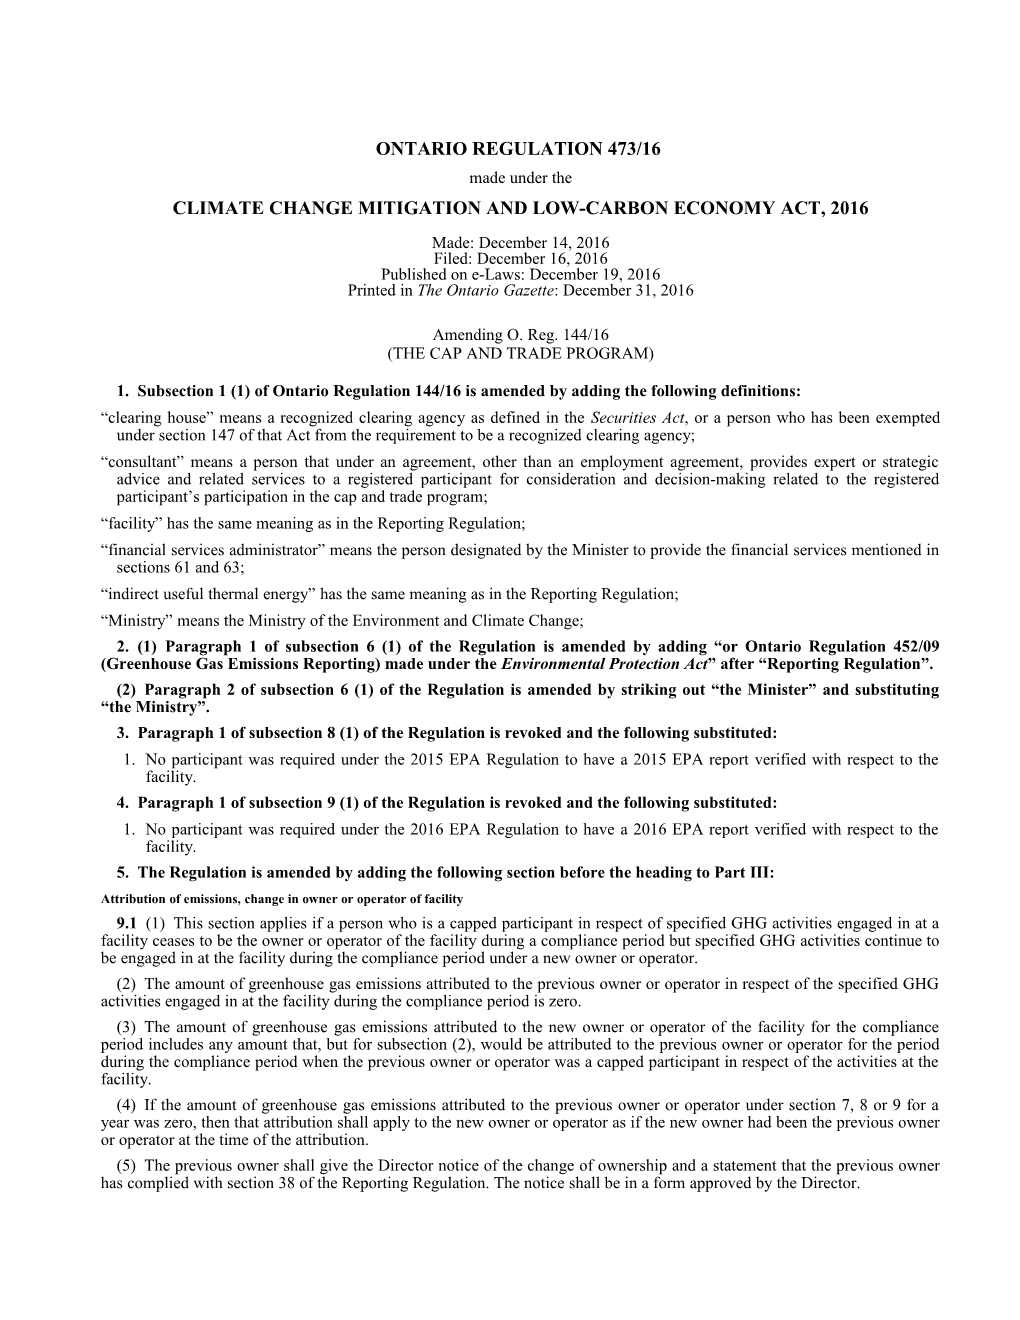 CLIMATE CHANGE MITIGATION and LOW-CARBON ECONOMY ACT, 2016 - O. Reg. 473/16